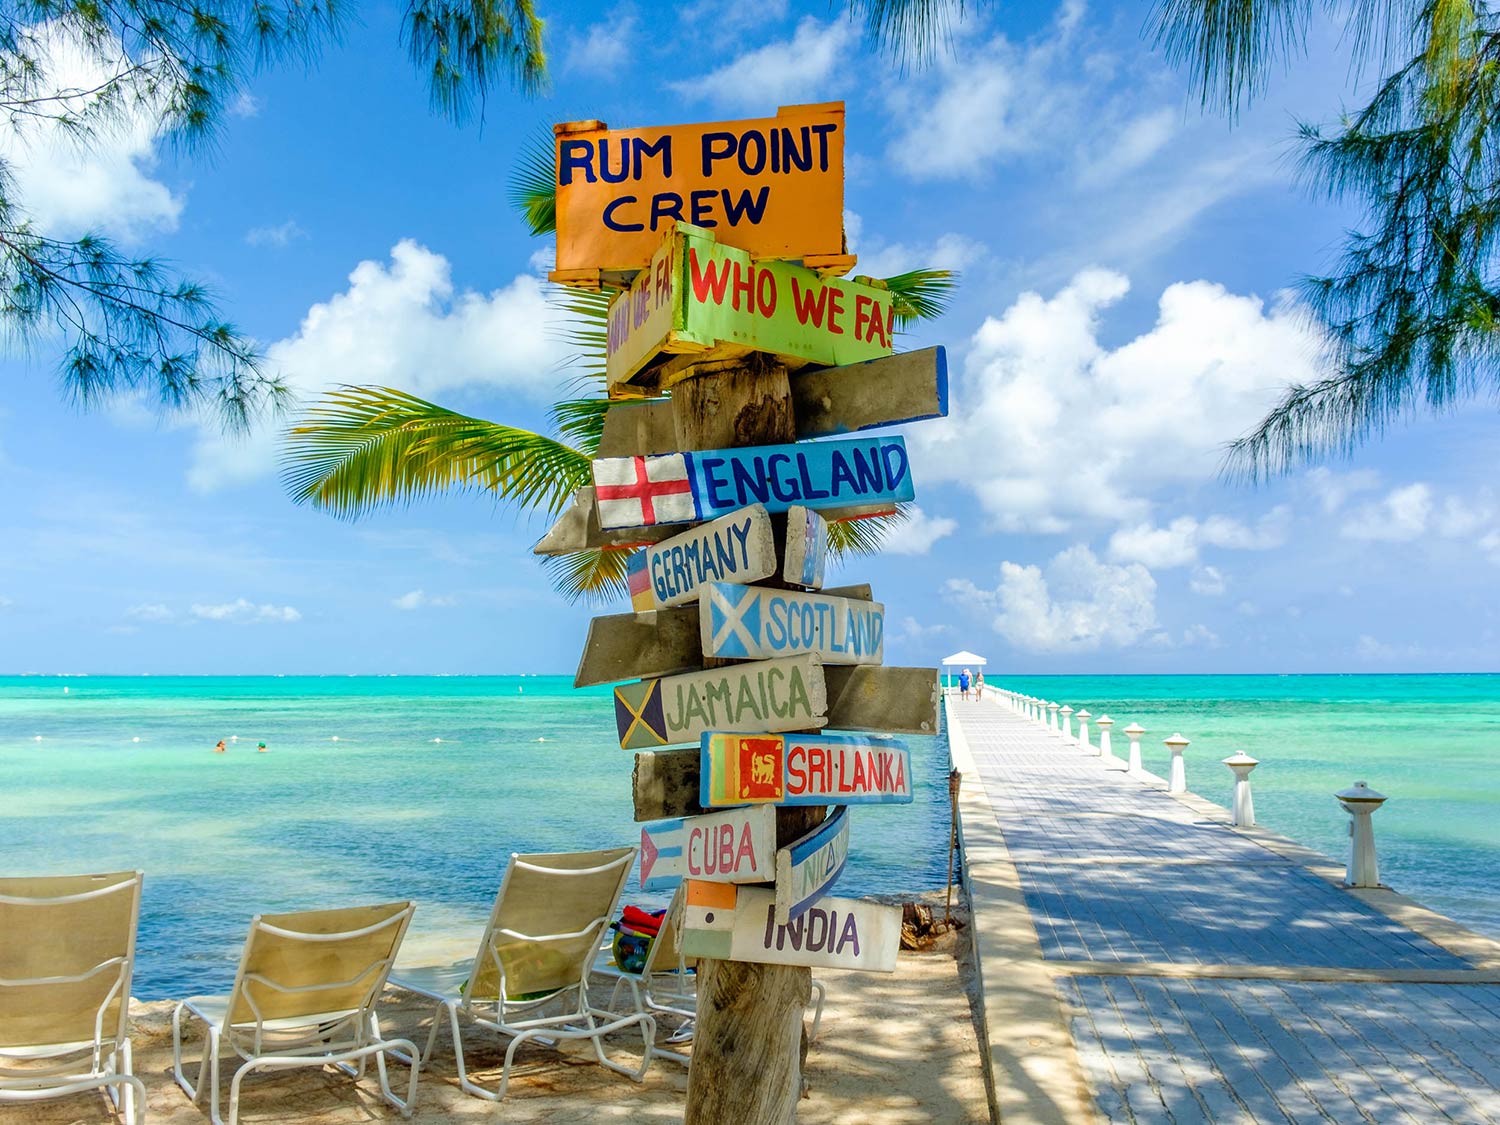 Rum Point Beach in the Cayman Islands takes effort to get to, but it's a crowd pleaser worth every minute of travel.